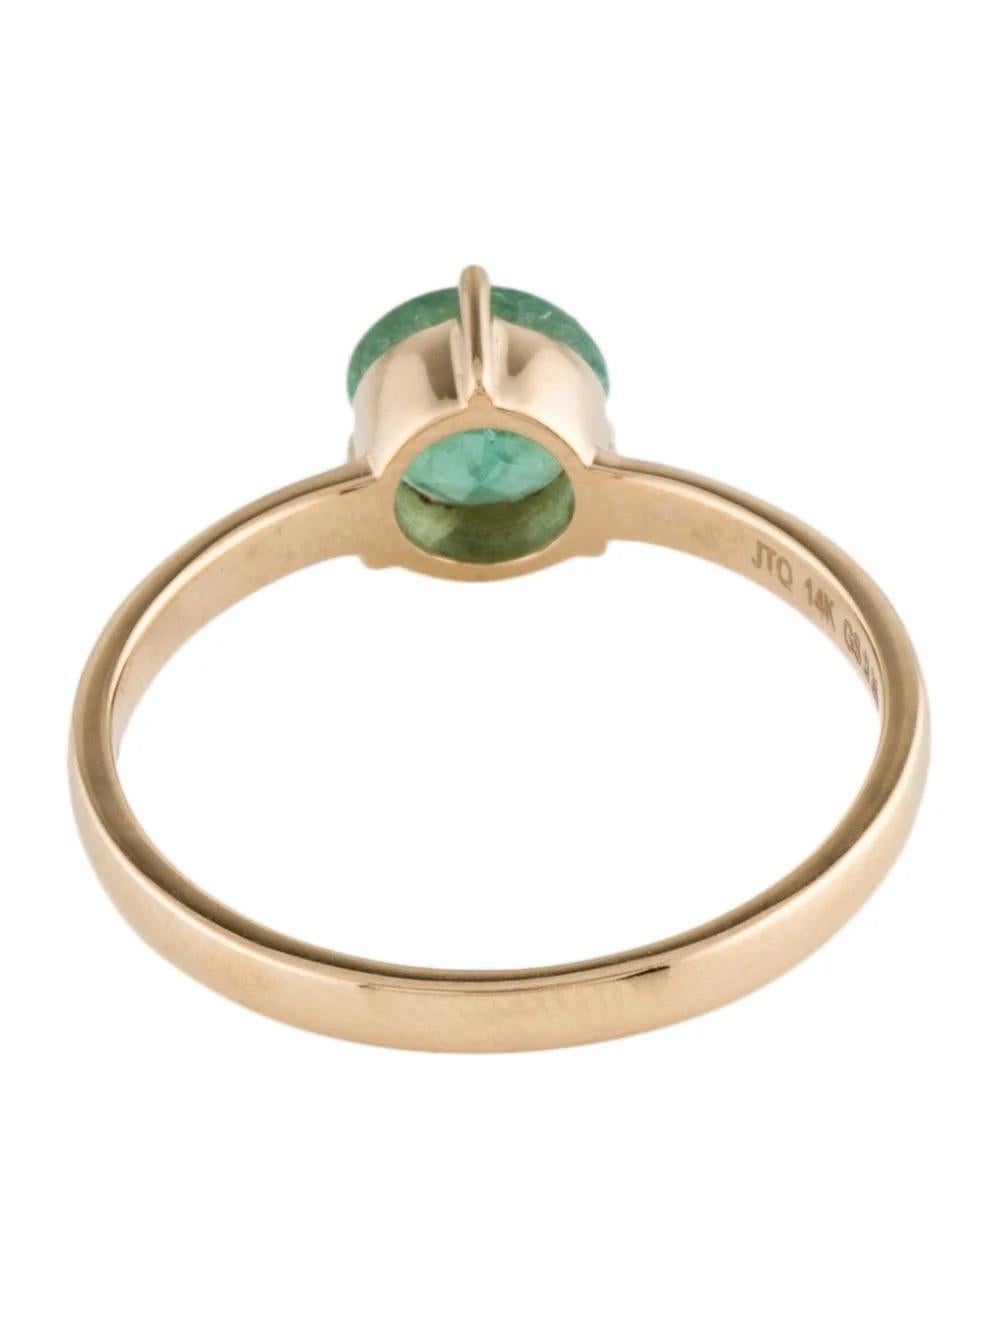 Vintage 14K Emerald Cocktail Ring, Size 6.75 - Elegant Green Gemstone Jewelry In New Condition For Sale In Holtsville, NY